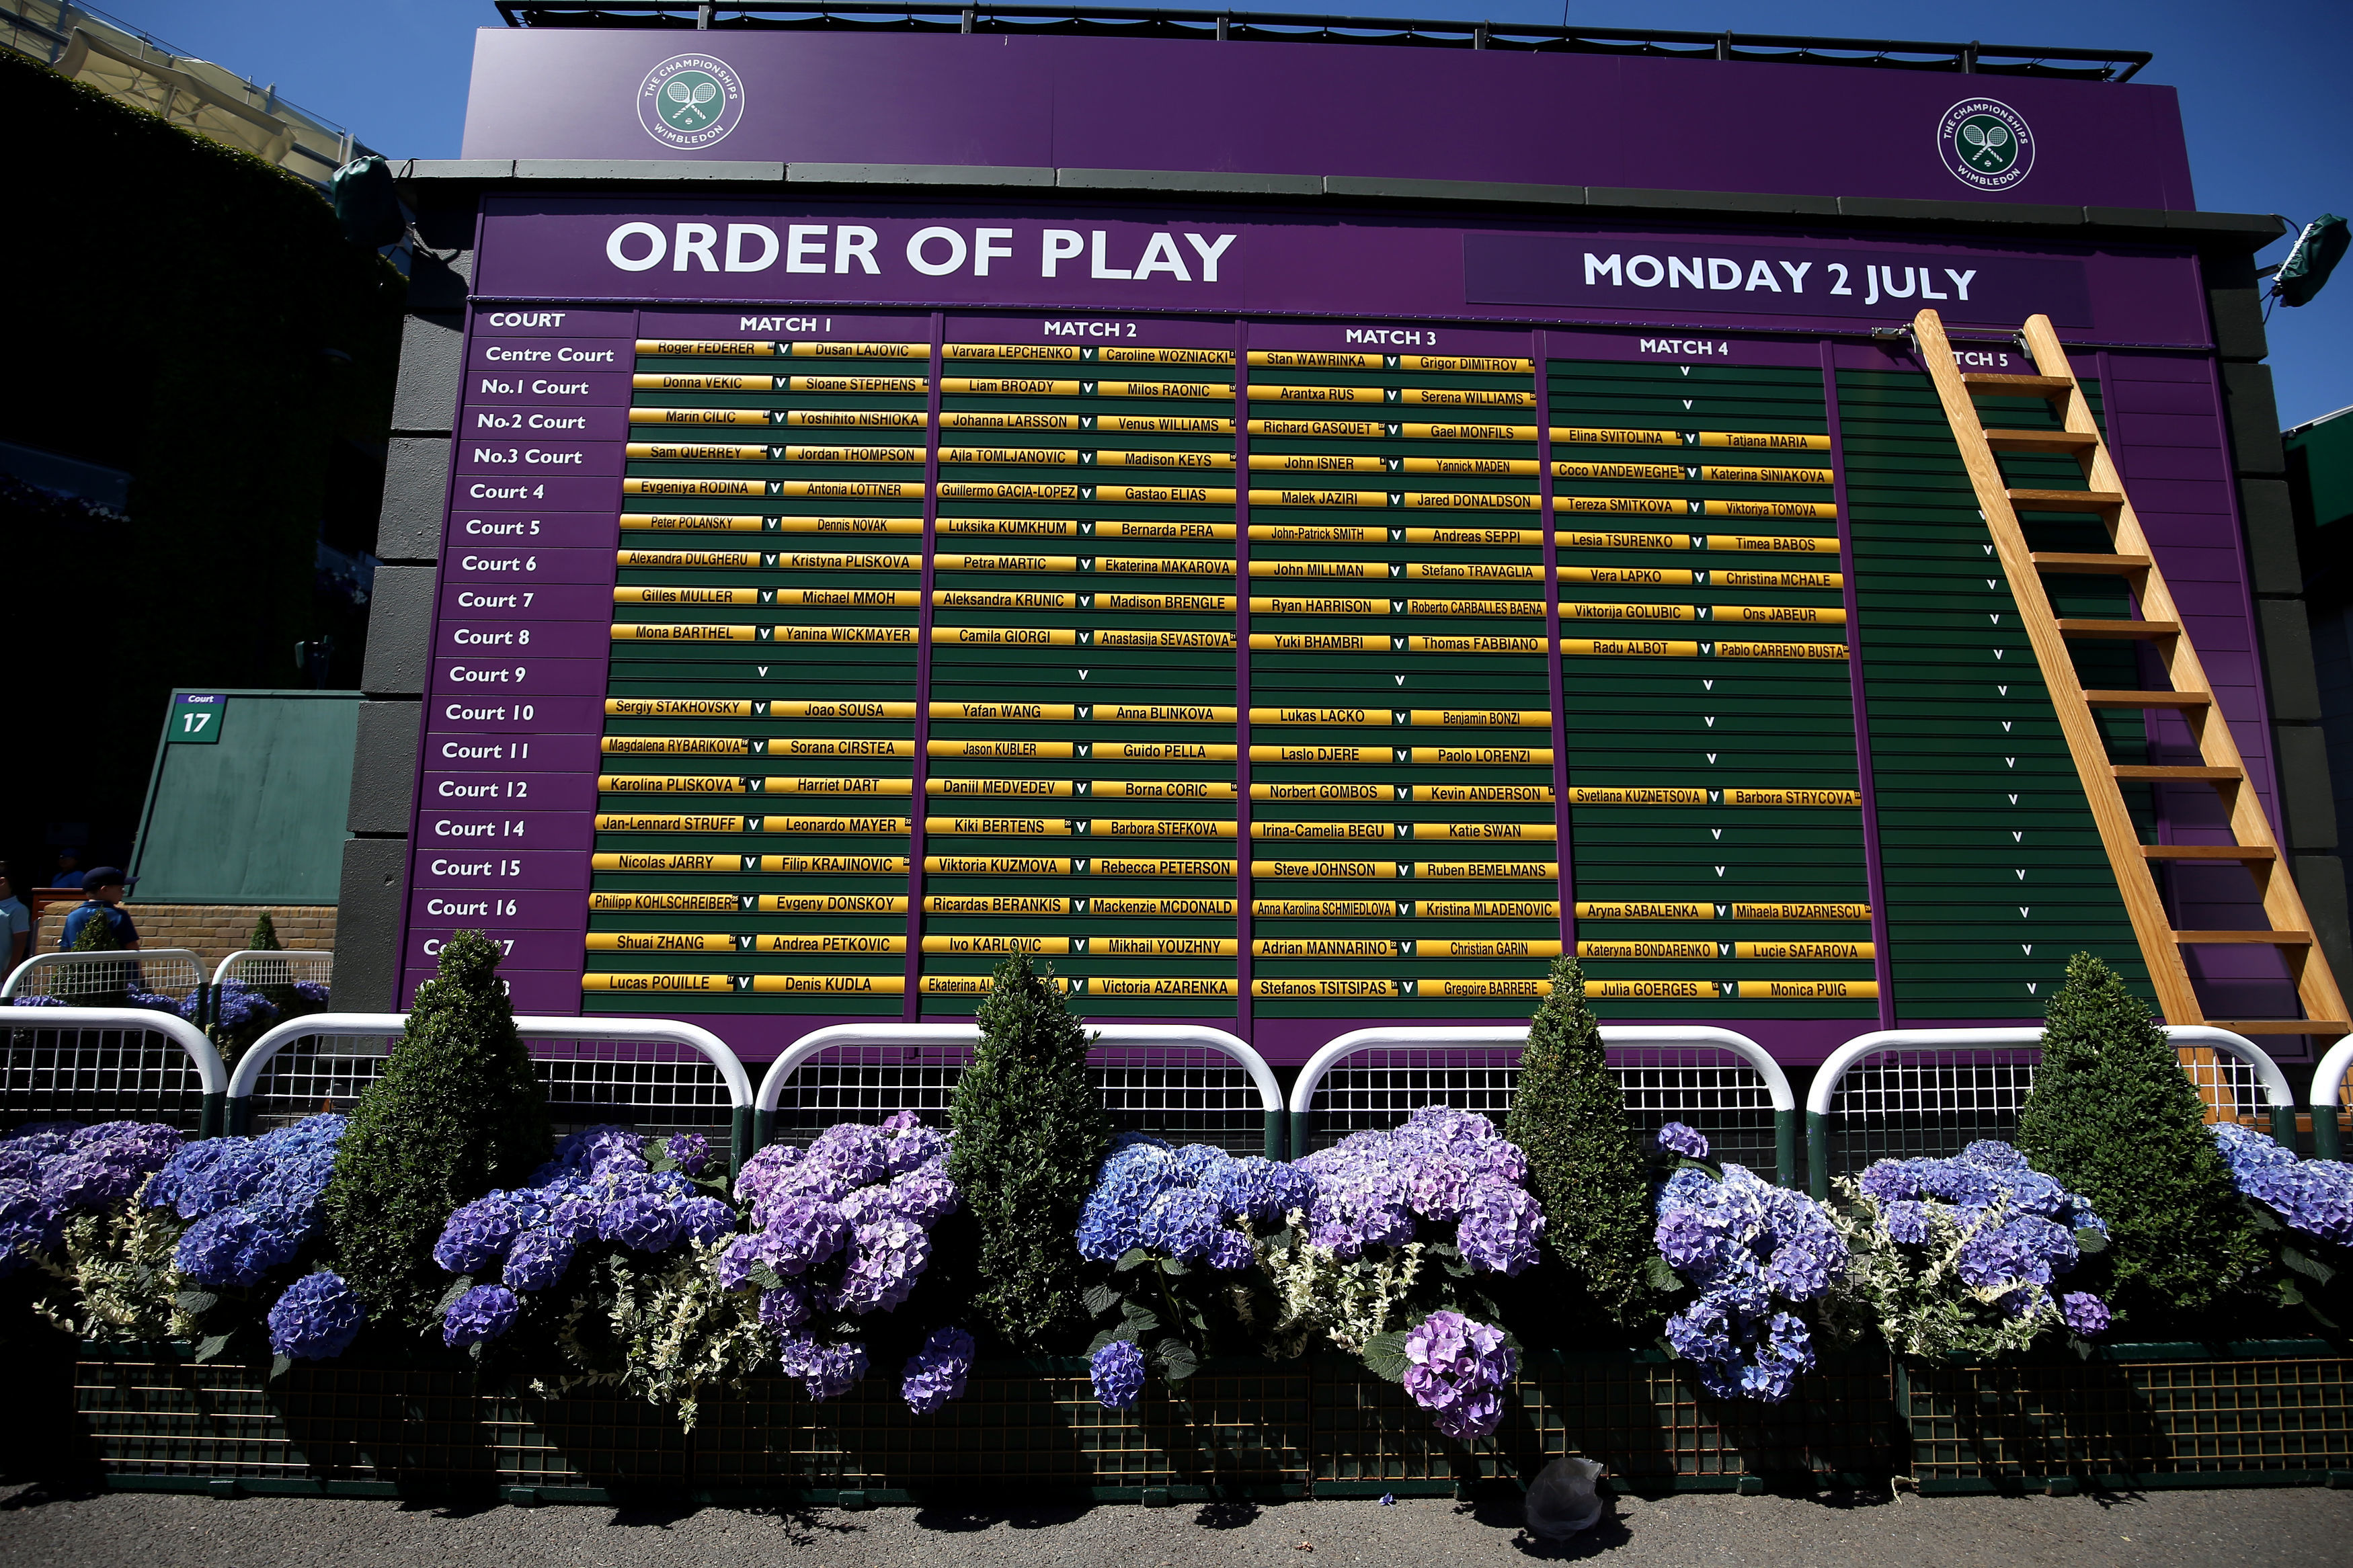 Order of play board on day one of the Wimbledon Championships at the All England Lawn Tennis and Croquet Club